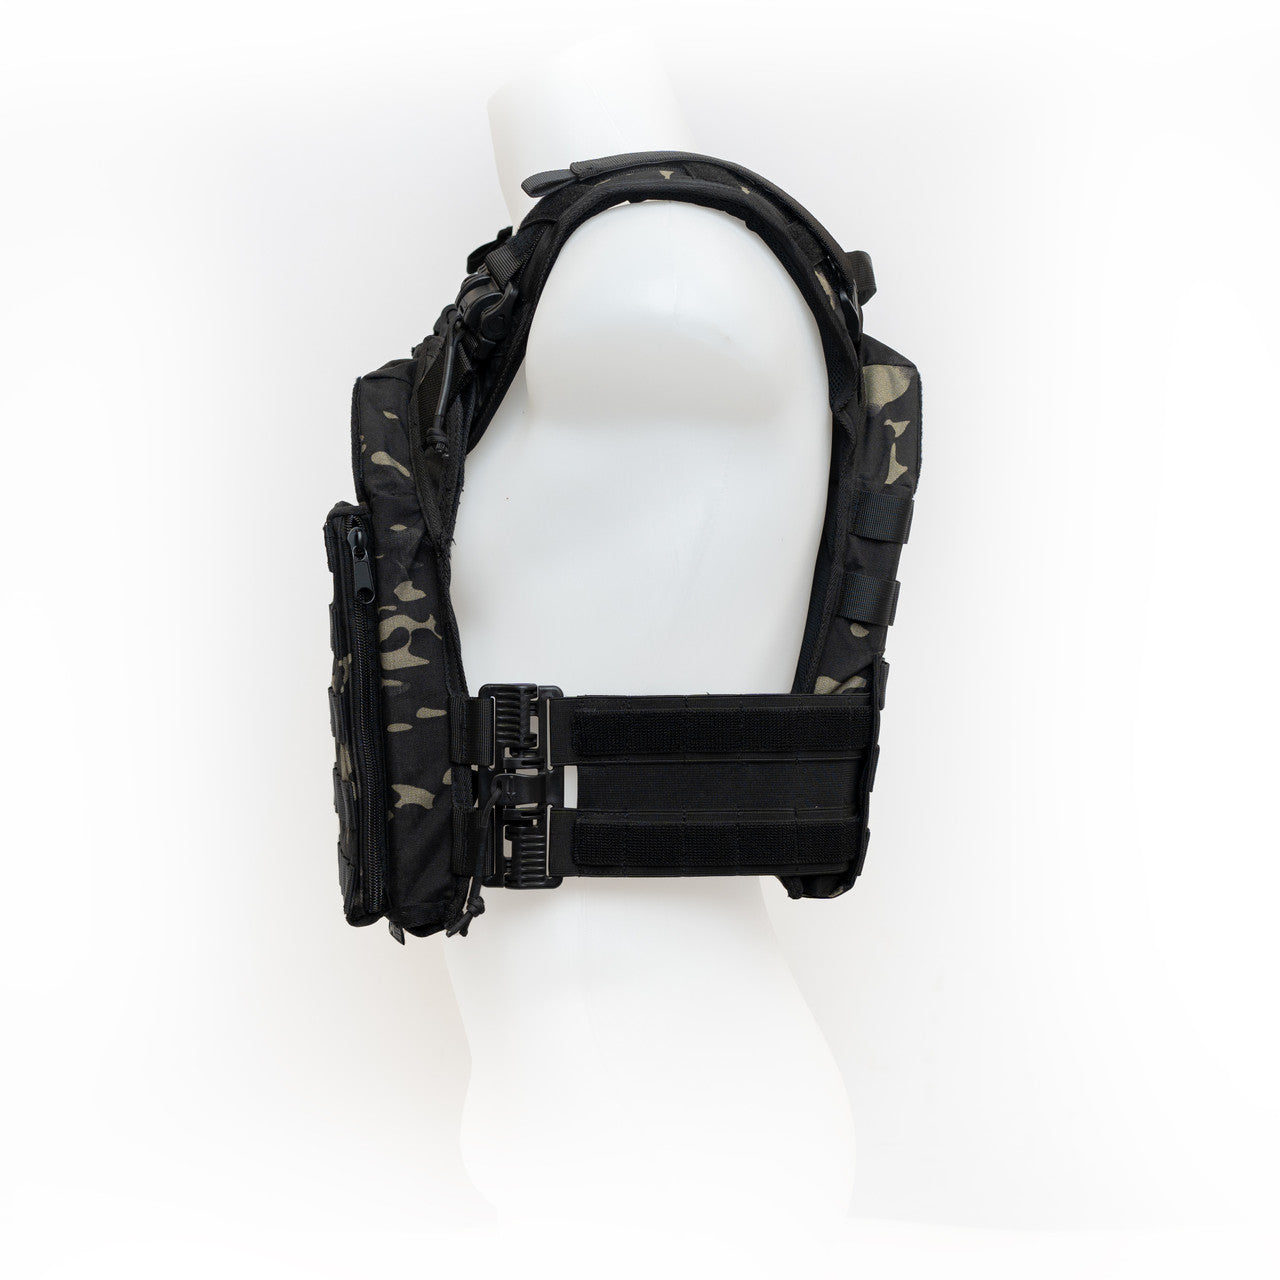 Tactical Innovations Canada, Quick Release Tactical Plate Carrier